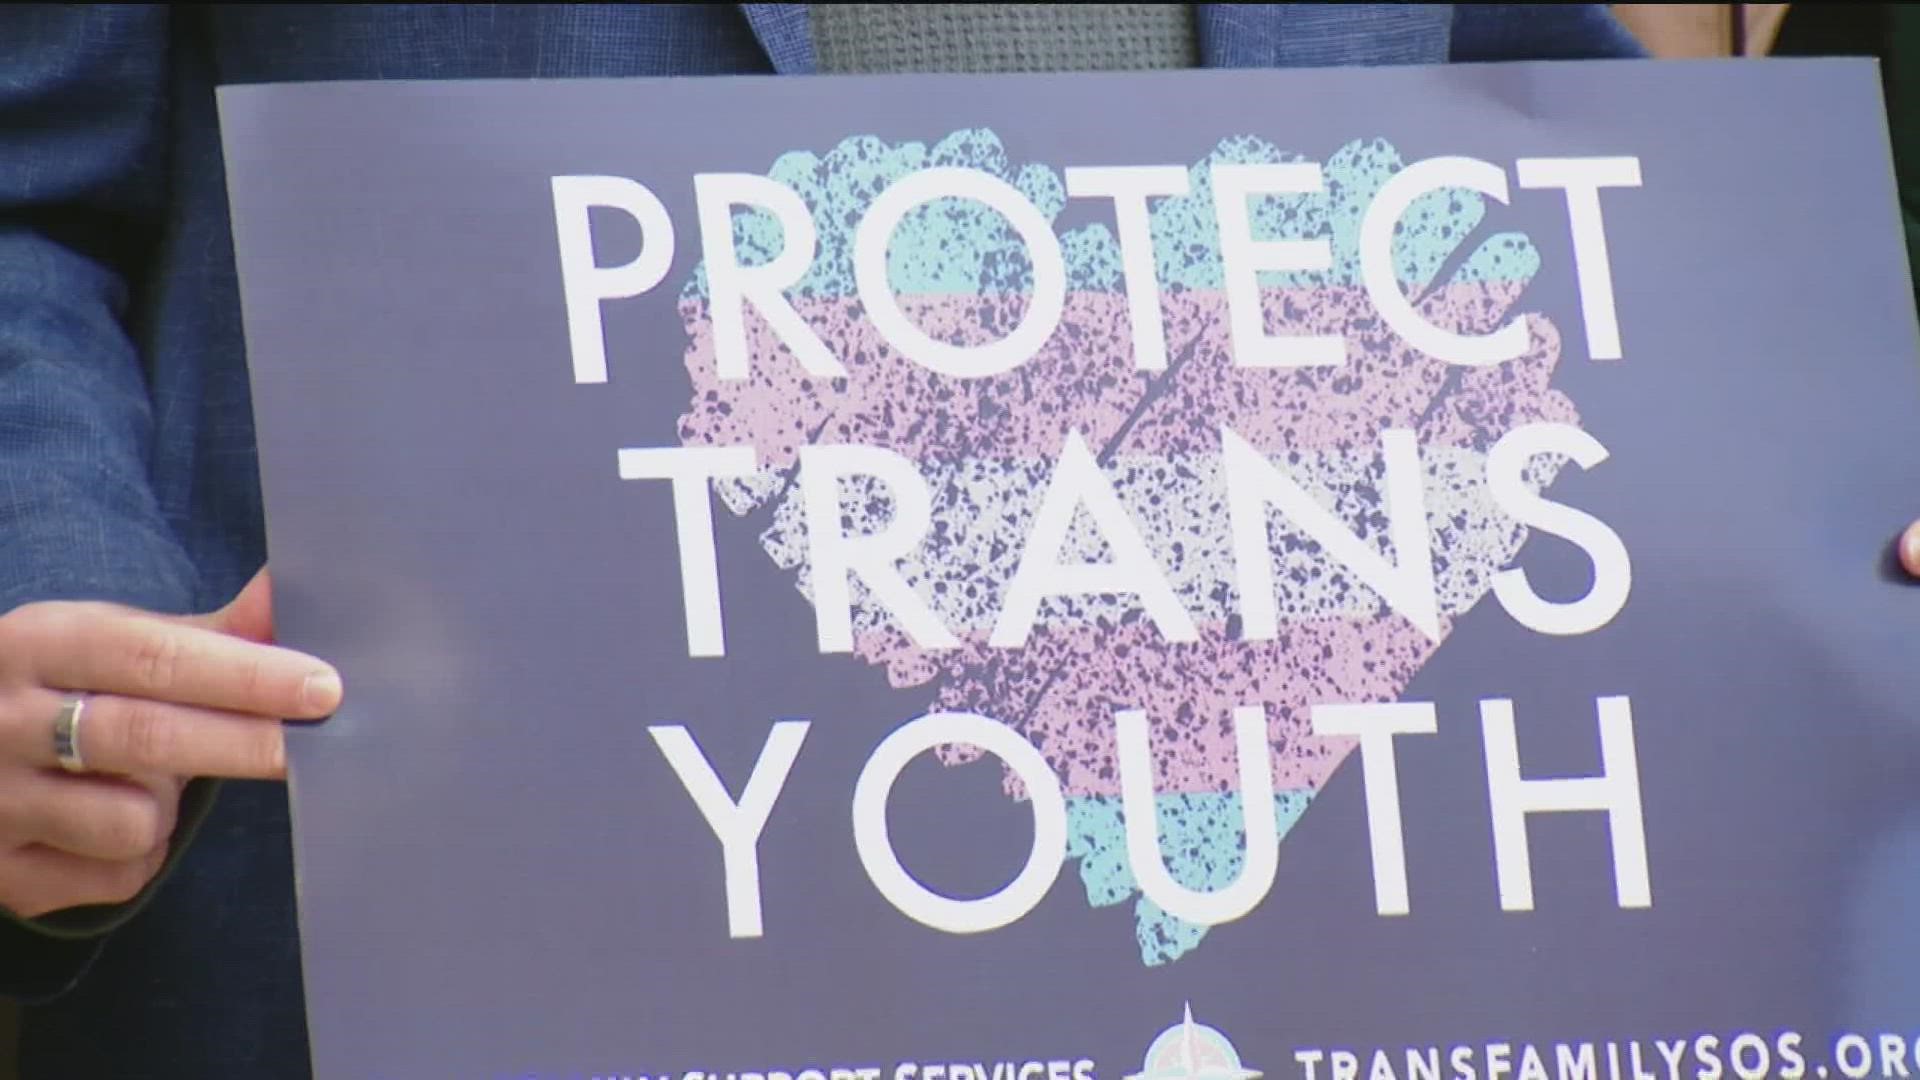 Councilmembers announced a resolution Tuesday, declaring San Diego a safe city for transgender, non-binary, and gender diverse youth.